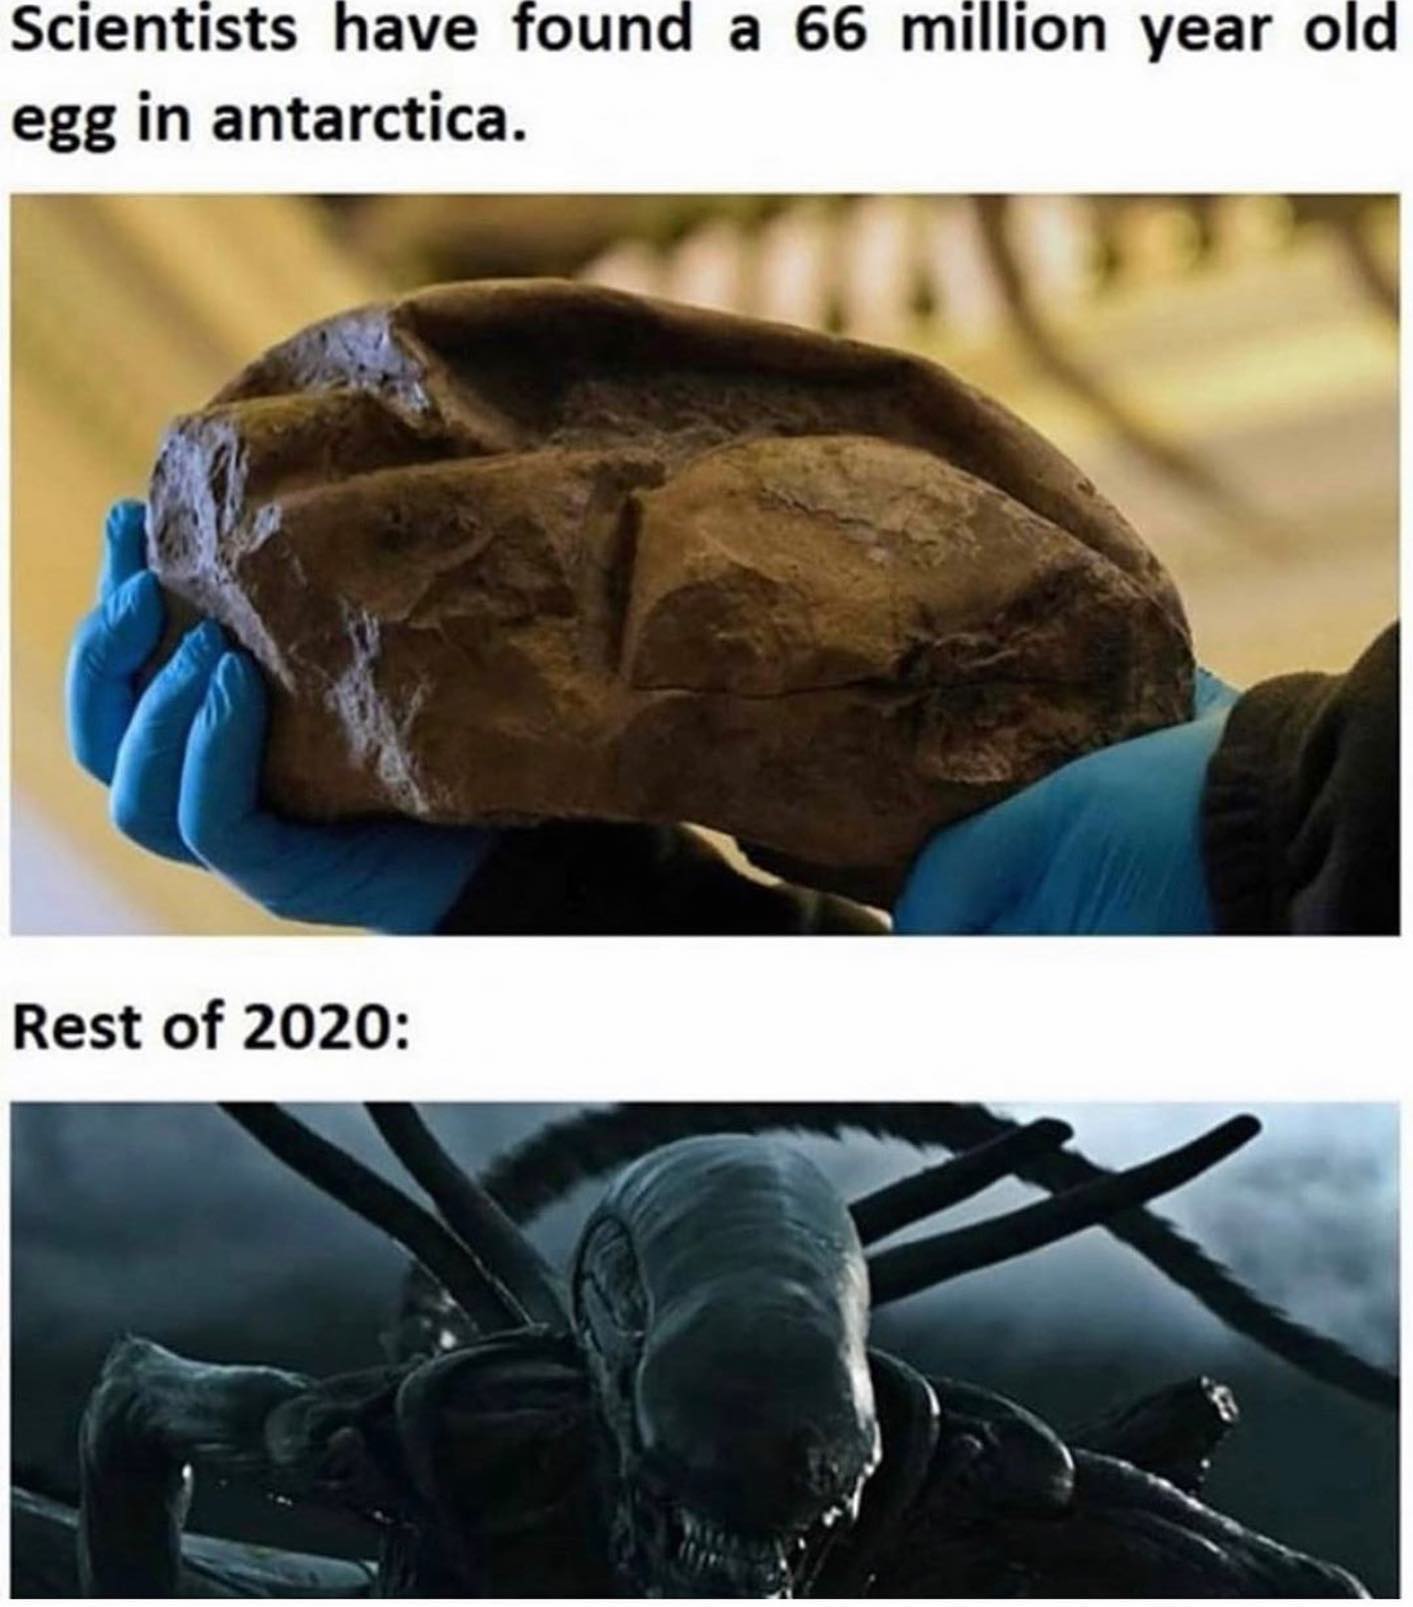 world's second largest egg - Scientists have found a 66 million year old egg in antarctica. Rest of 2020